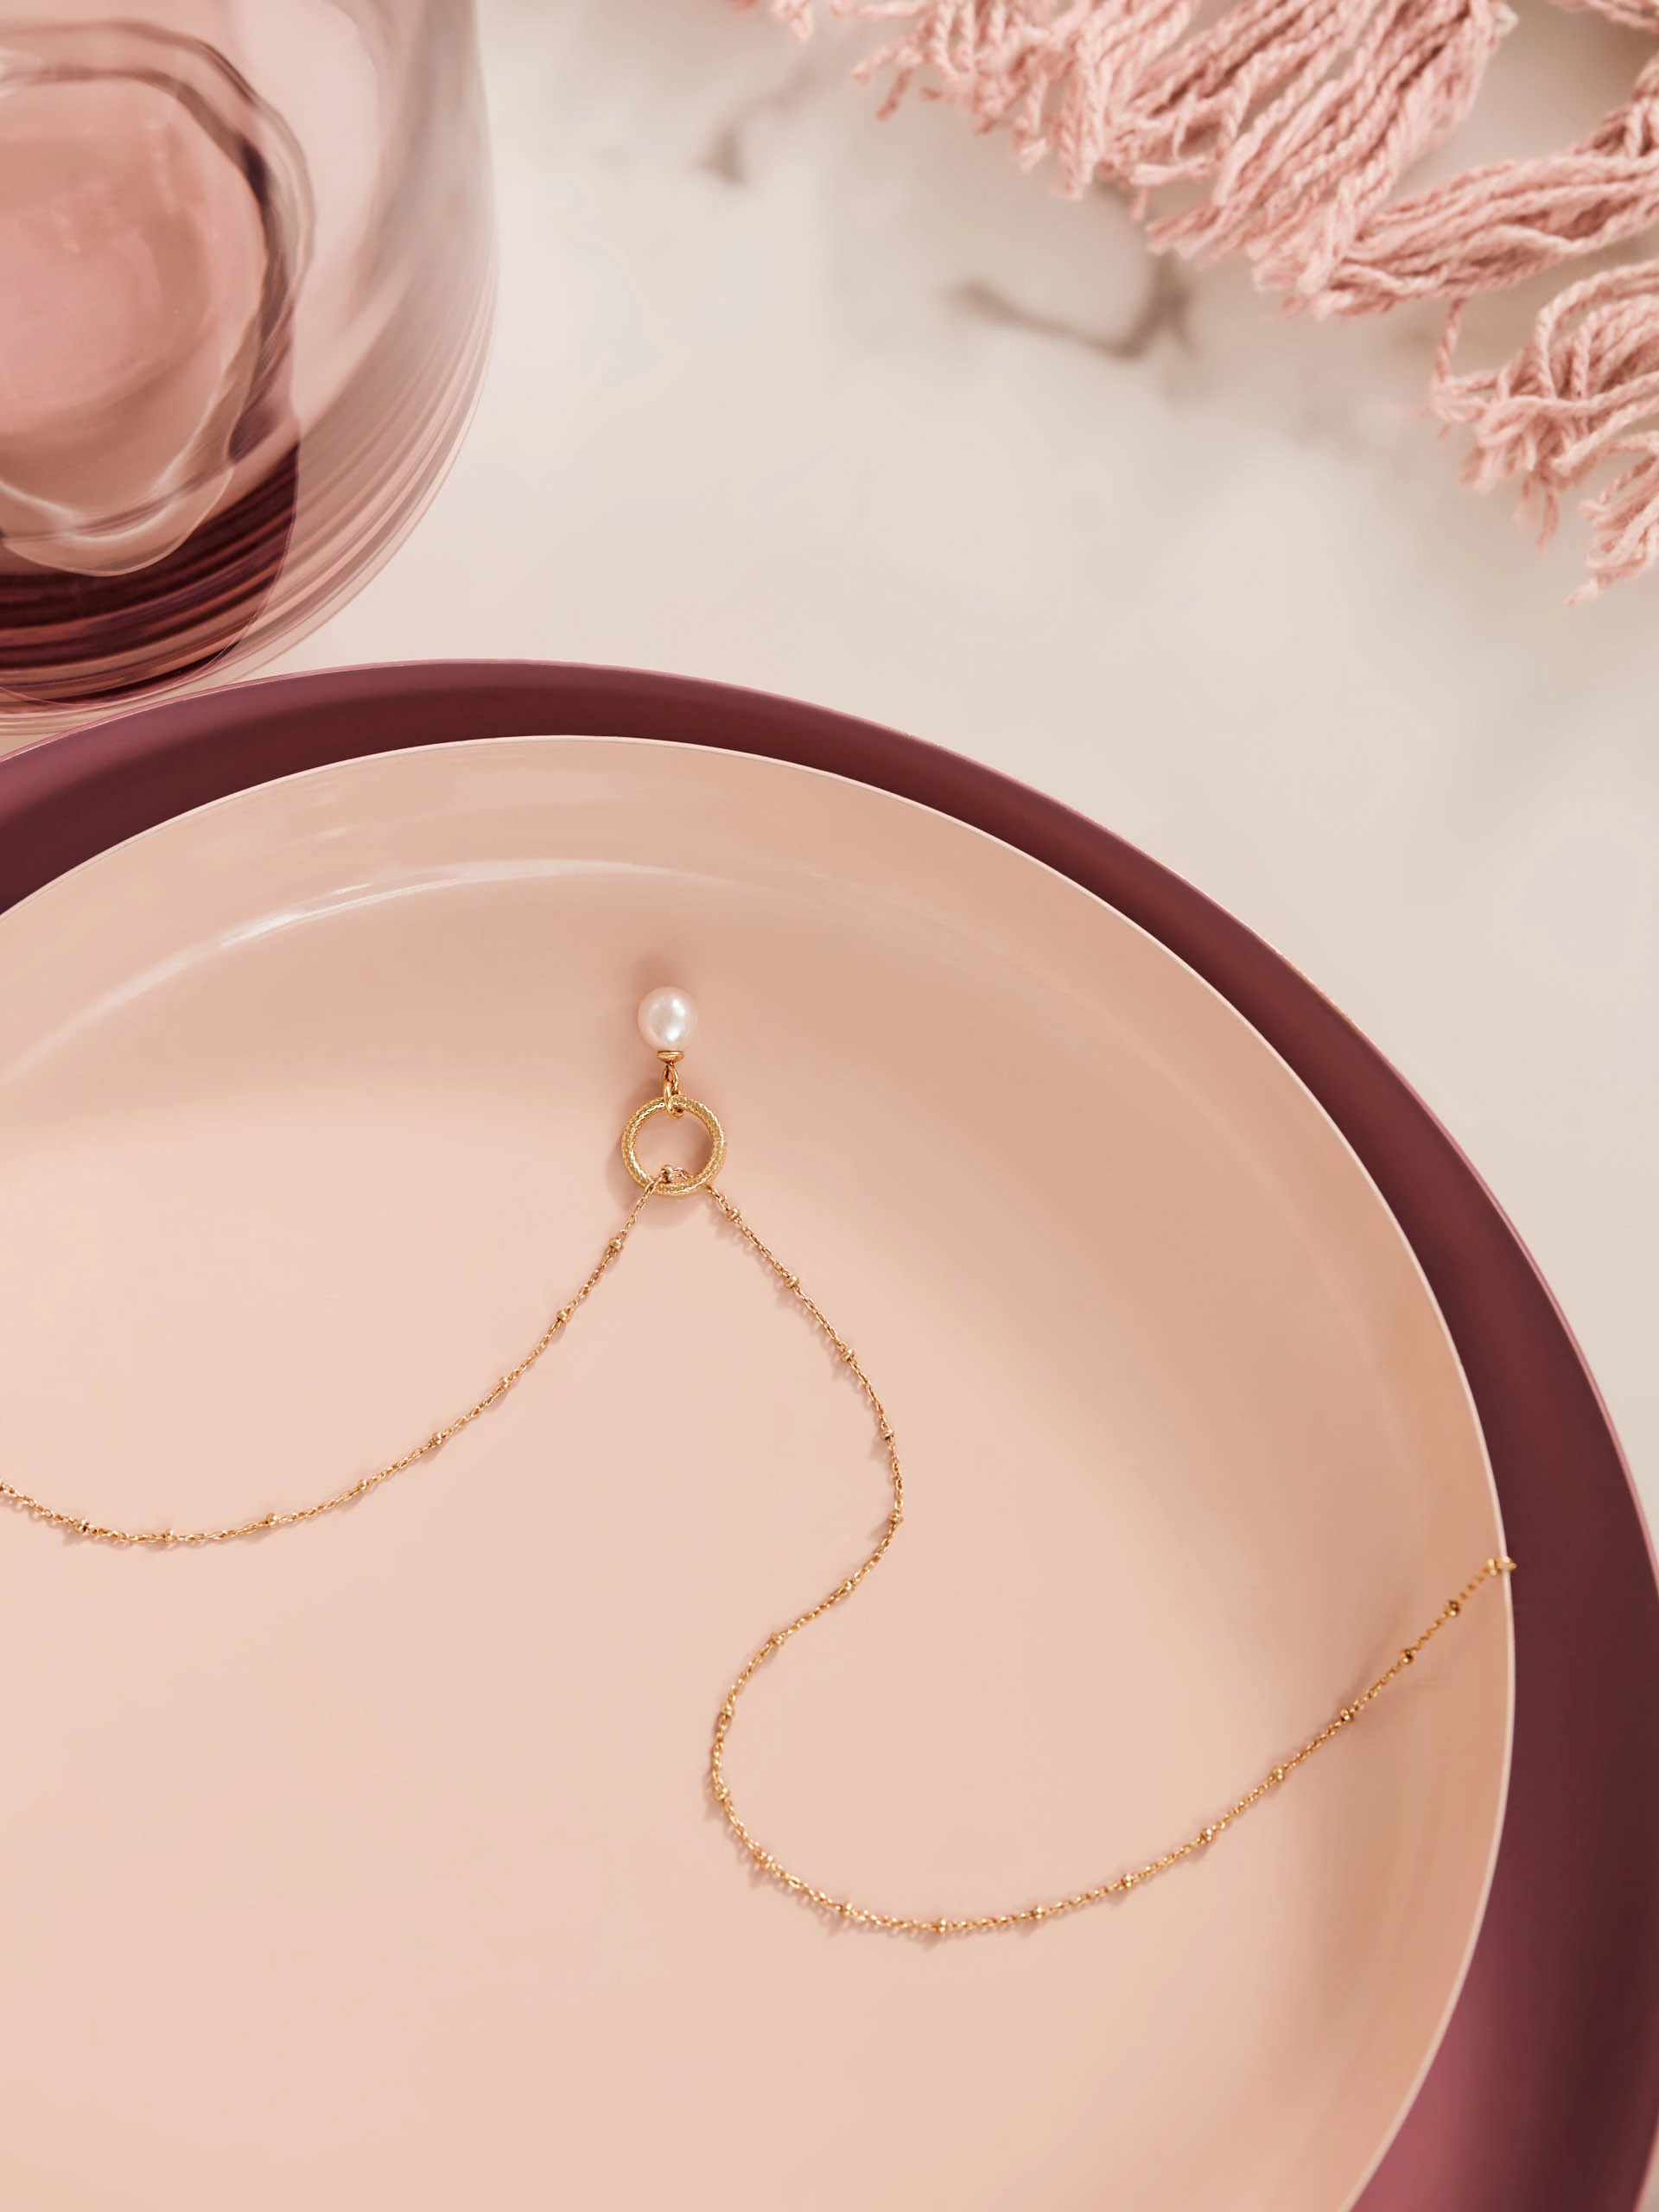 GOLD PLATED PEARL NECKLACE